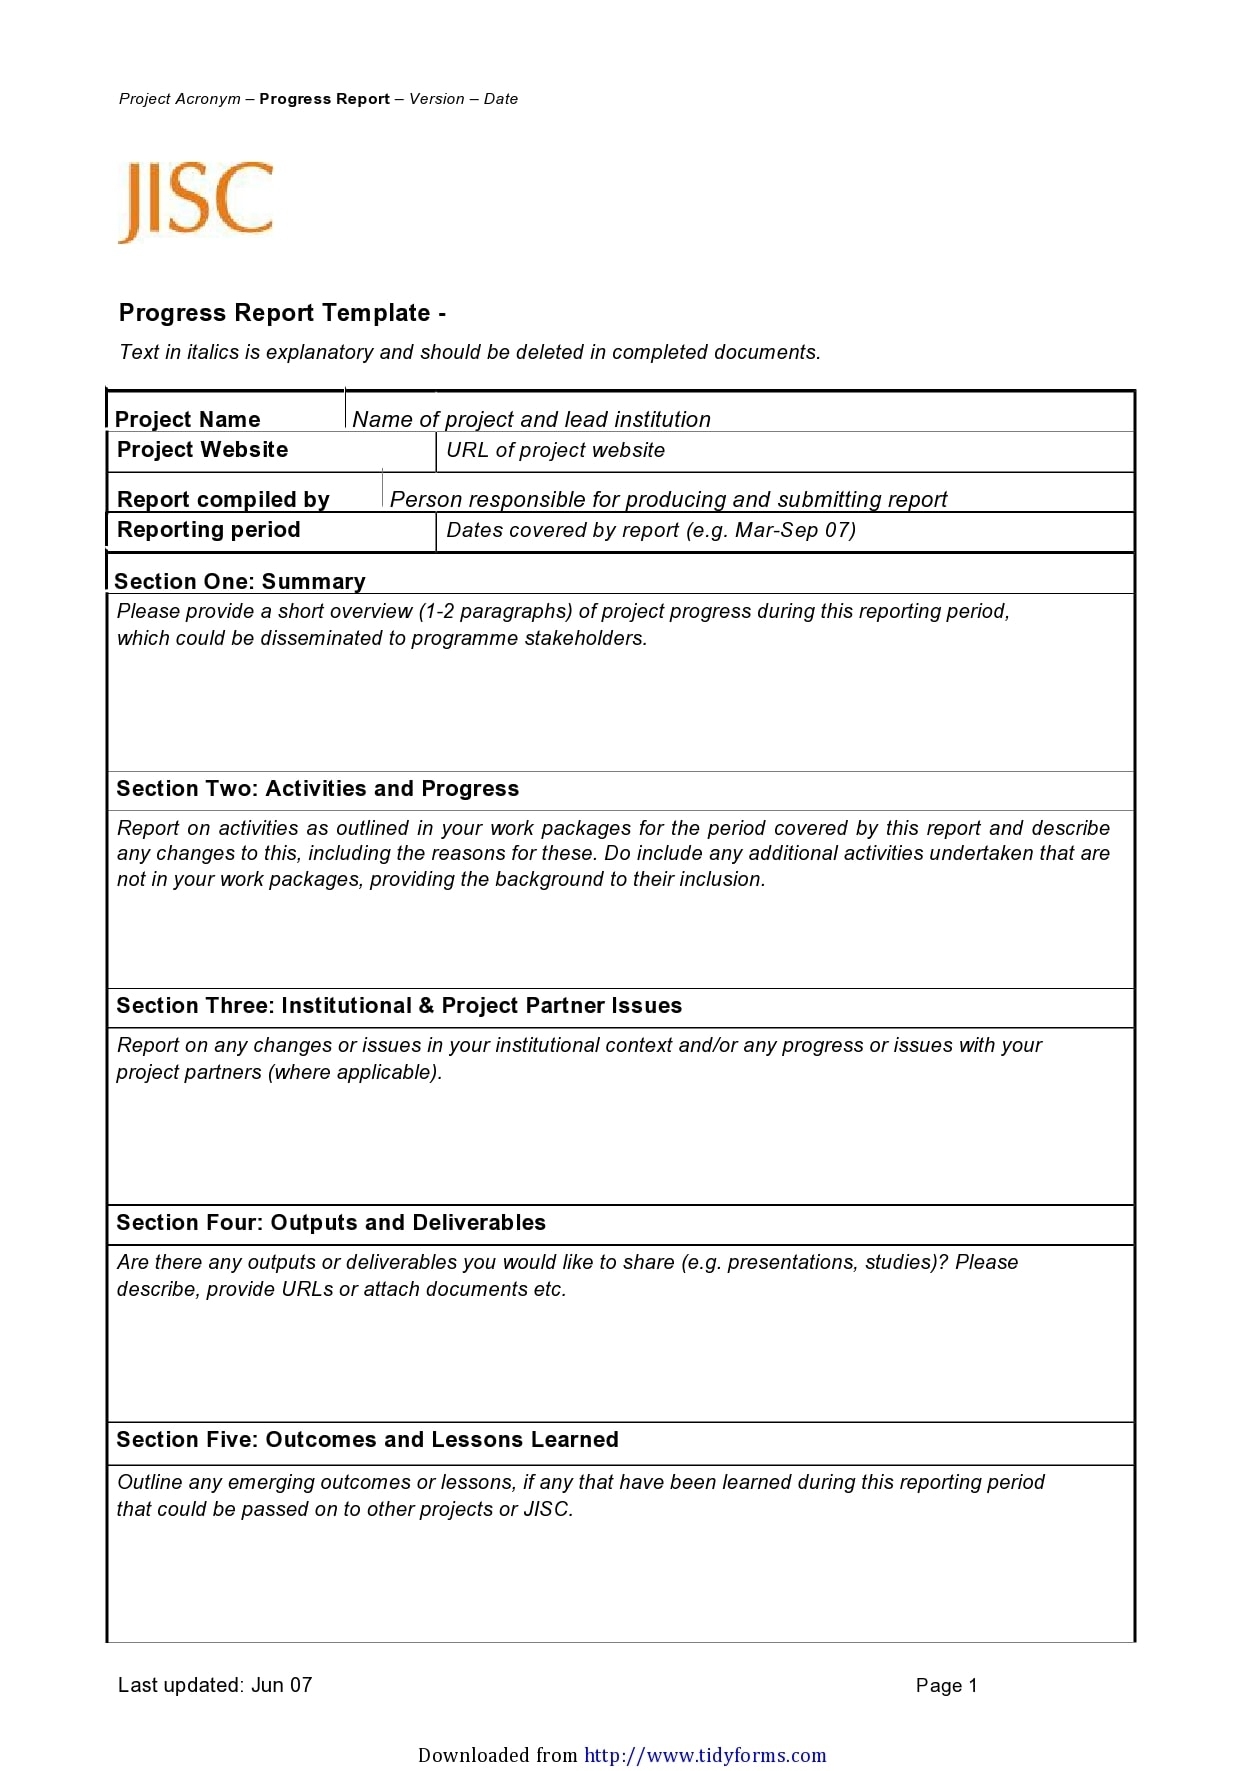 50 Professional Progress Report Templates (Free) – Templatearchive Intended For Company Progress Report Template